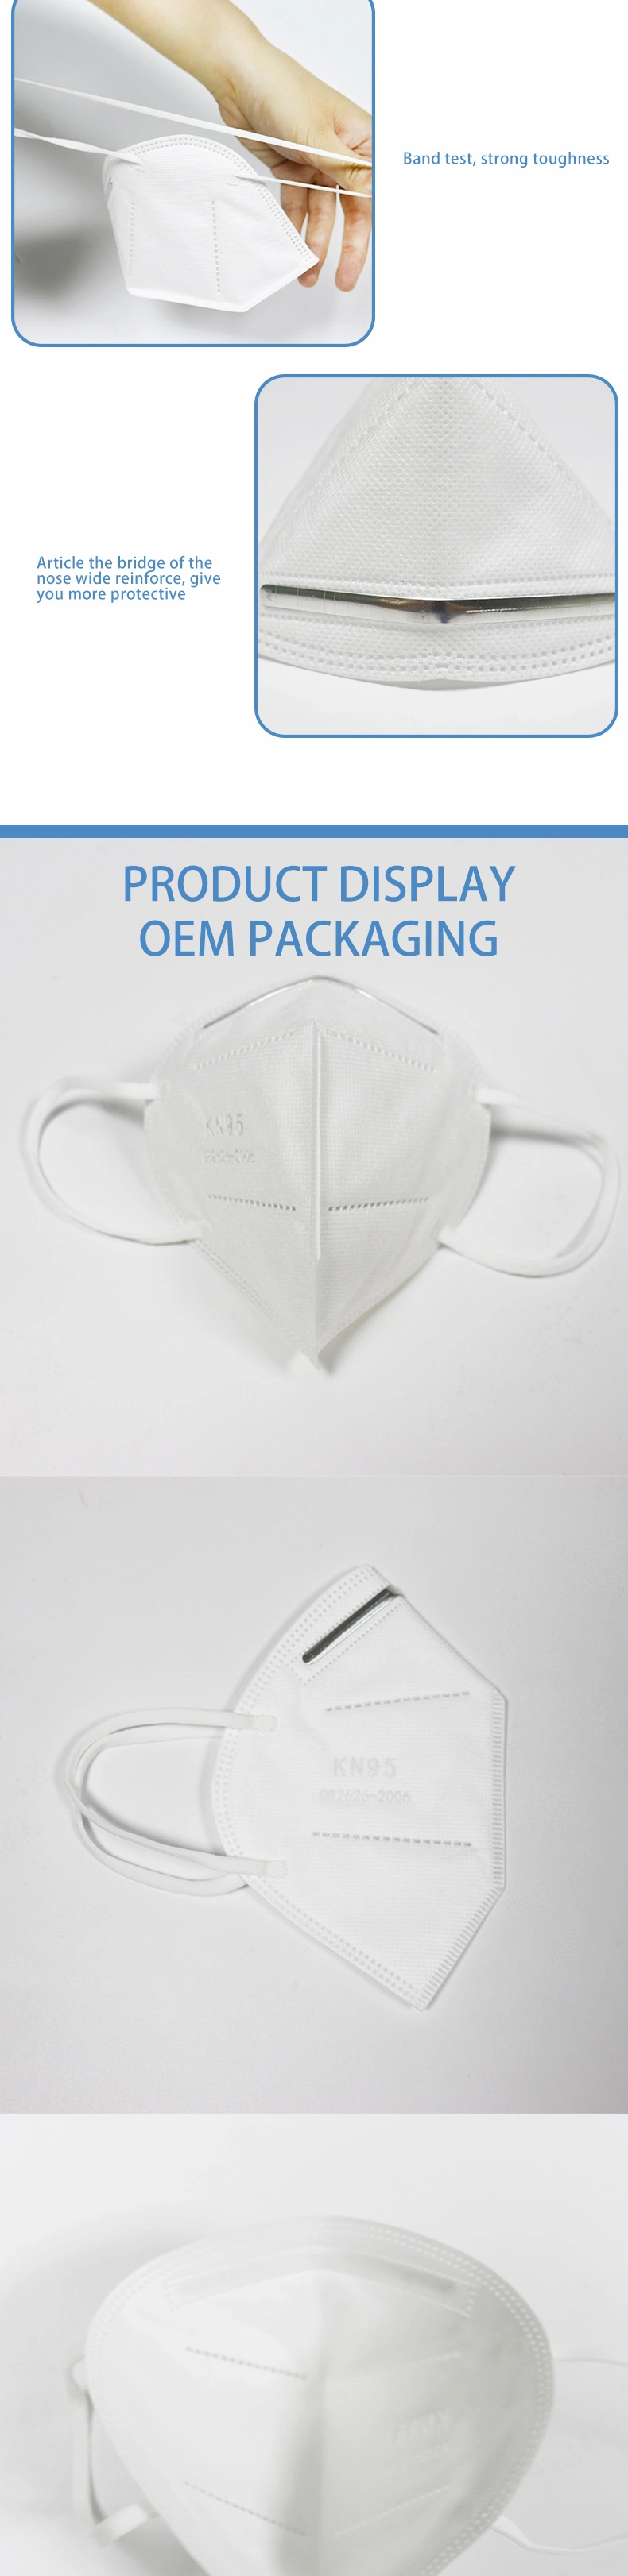 Hot Sale Non-Woven Disposable KN95 Mask Filter Face Mask Earloop KN95 Kn 95 Mask